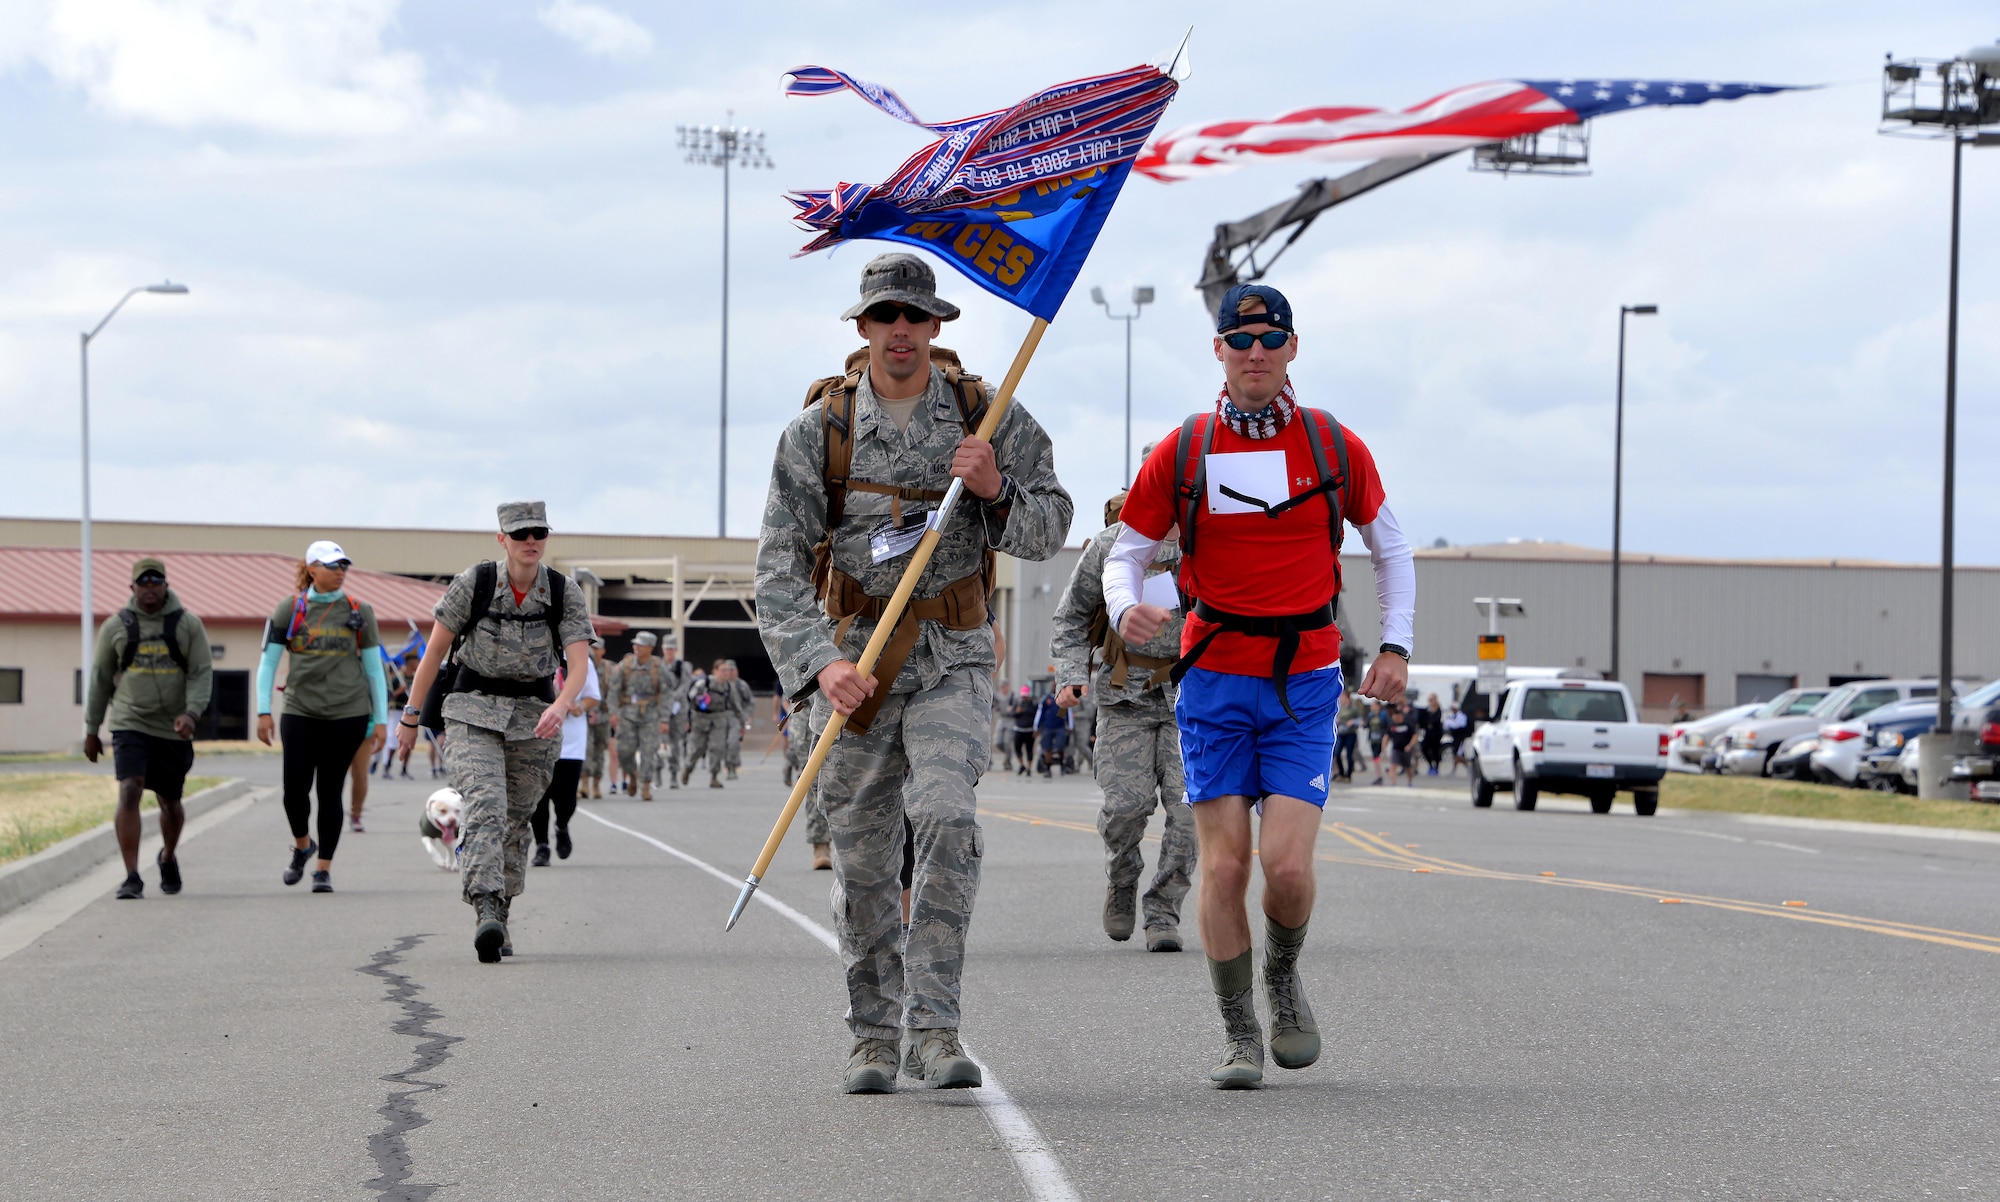 1st Lt. Derek Raska, 60th Civil Engineer Squadron deputy flight chief readiness and emergency management, carries his unit's guideon while participating in the Gold Star Families Ruck March at Travis Air Force Base, Calif., May 21, 2016. Approximately 200 service members participated in the sixth annual GSFRM, honoring the more than 45 Gold Star family members who were in attendance. (U.S. Air Force photo by Staff Sgt. Charles Rivezzo)